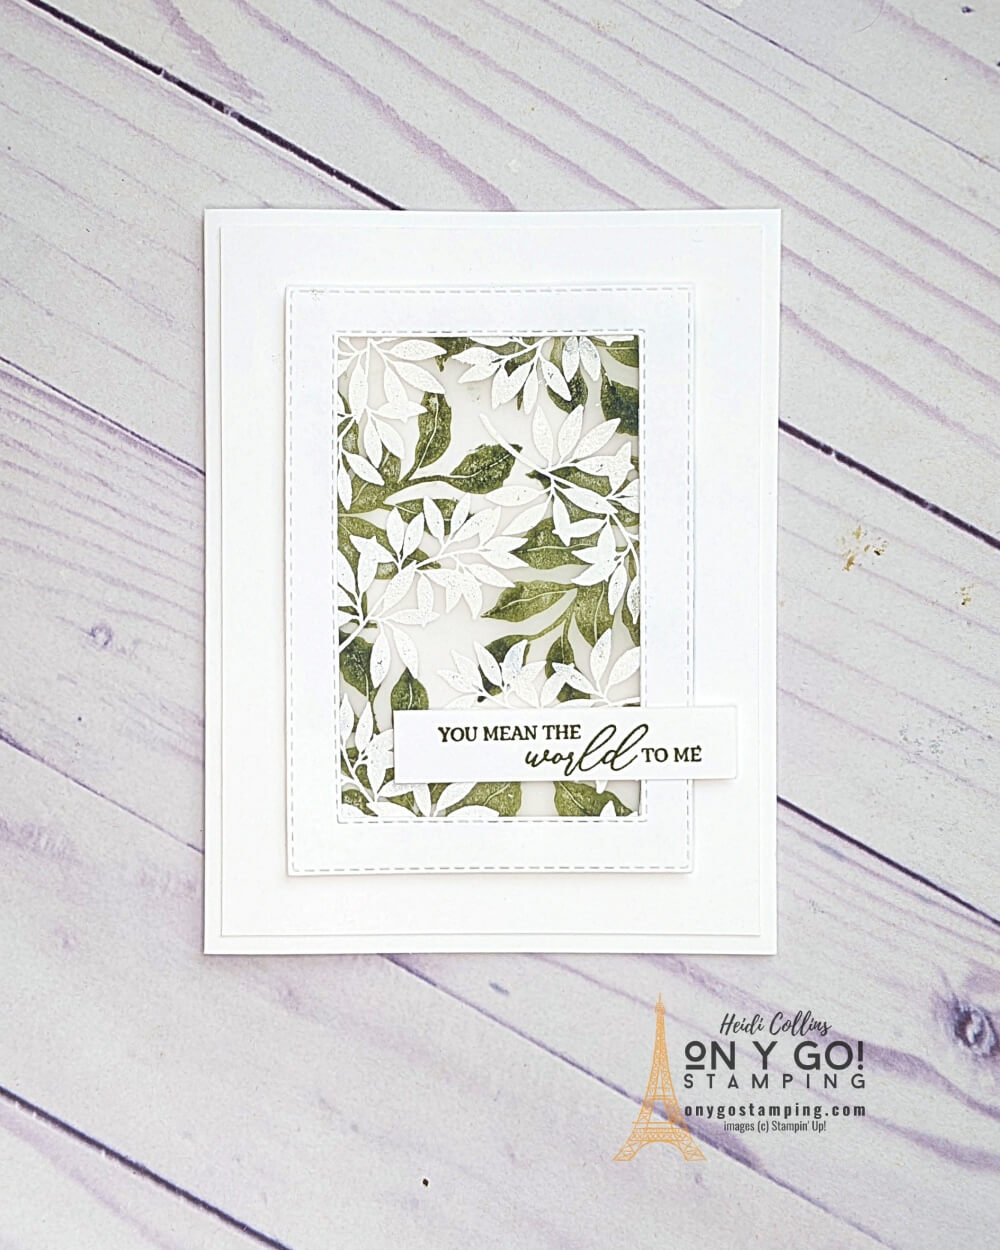 Get a free downloadable quick reference guide for the Double stamped vellum card making technique and see more sample card designs! This card uses the Botanical Layers stamps set from Stampin' Up!®